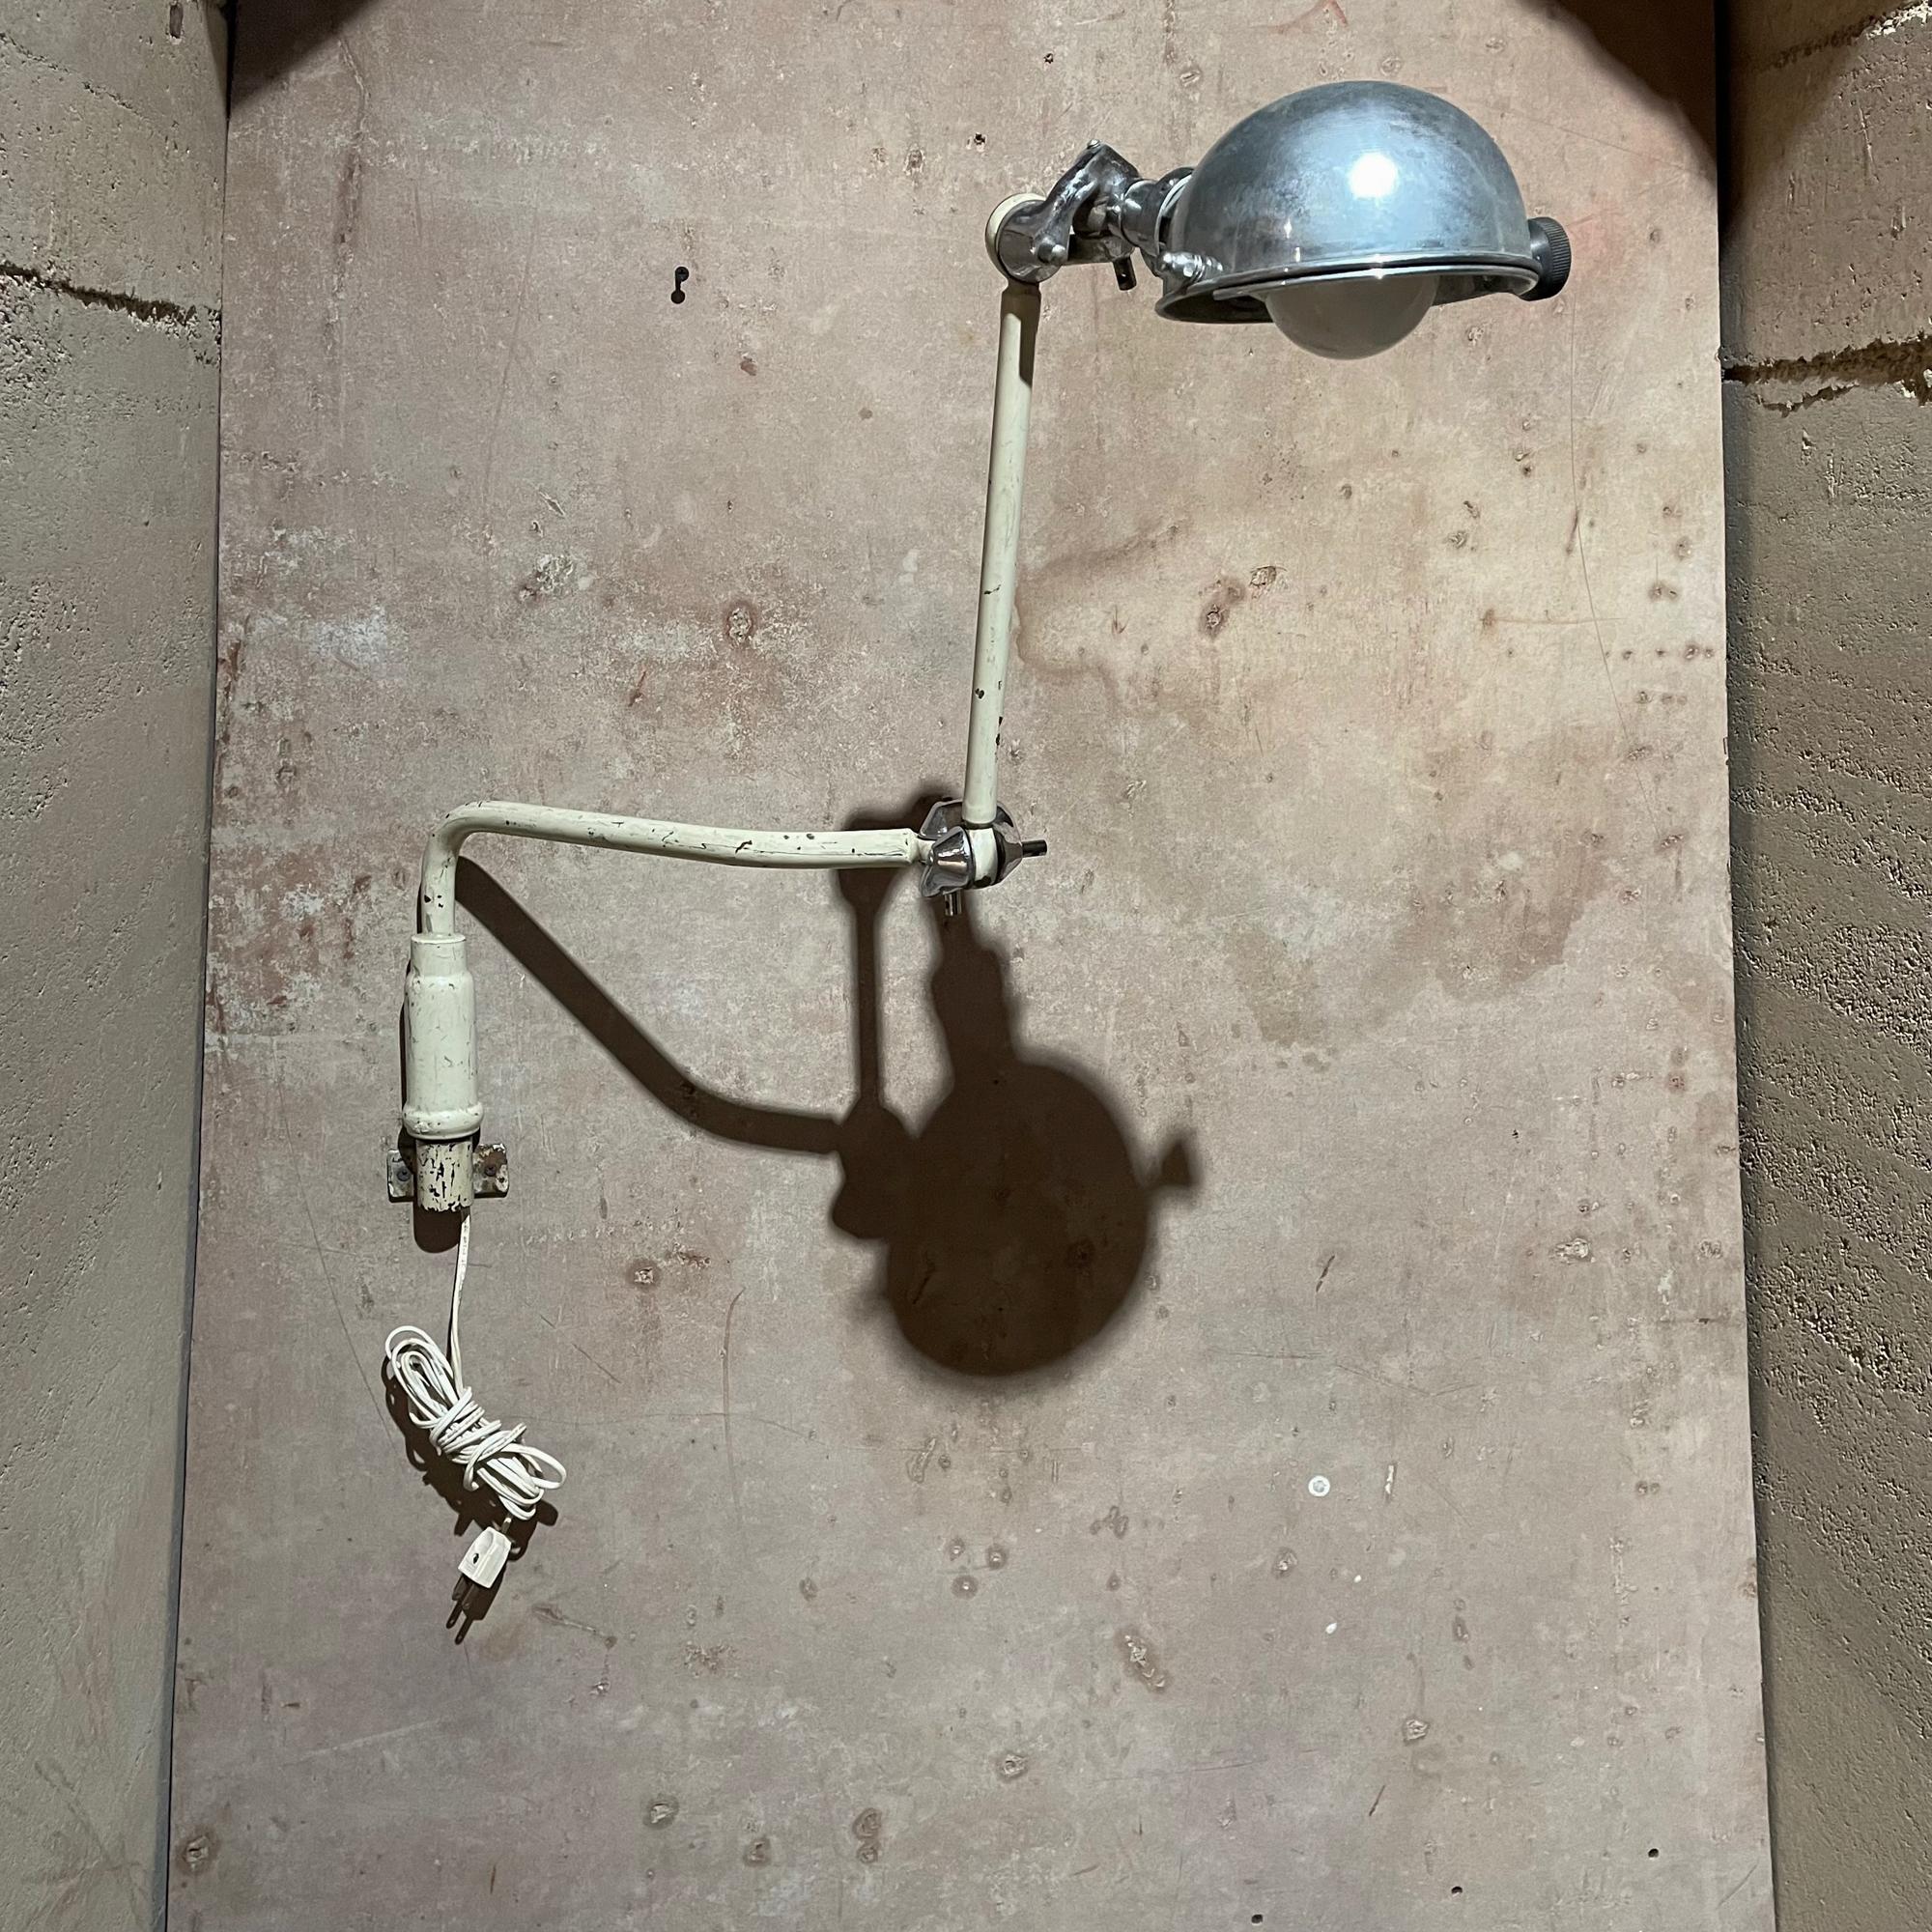 Wall Sconce Lamp
Vintage Industrial medical light surgical dental wall sconce lamp circa 1930s
Constructed in bronze and brass. Brass is chrome-plated.
The bronze body is painted white some areas are chrome-plated. 
Lamp has multiple adjustments for